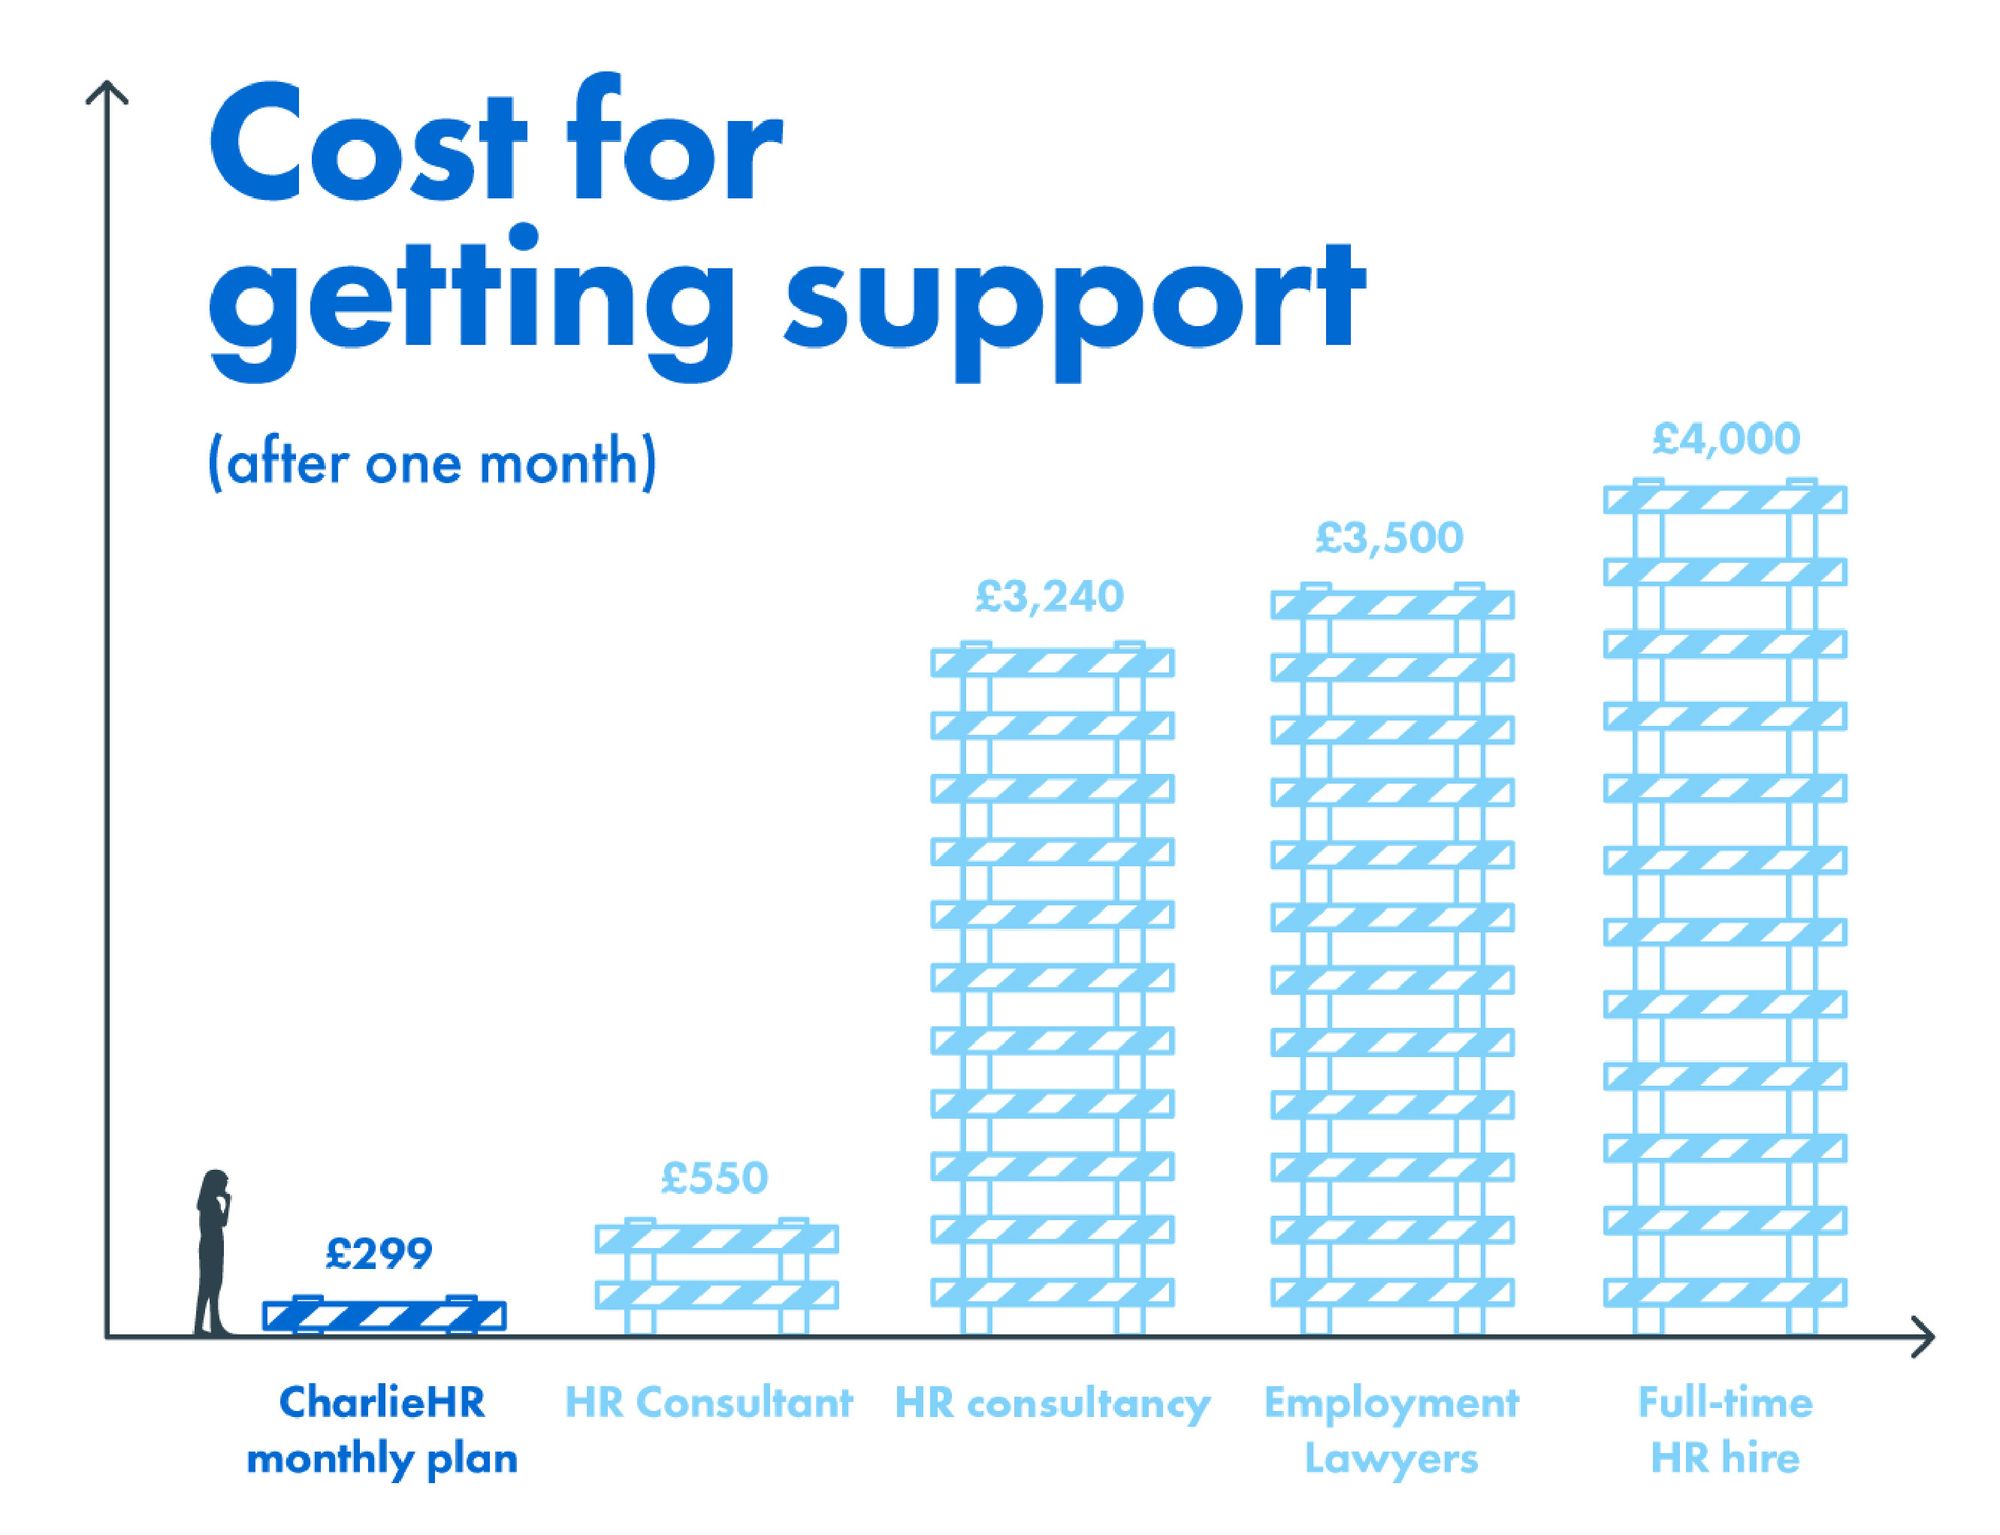 Comparison cost for getting support - with CharlieHR only £299 and more than £3,000 for Peninsula